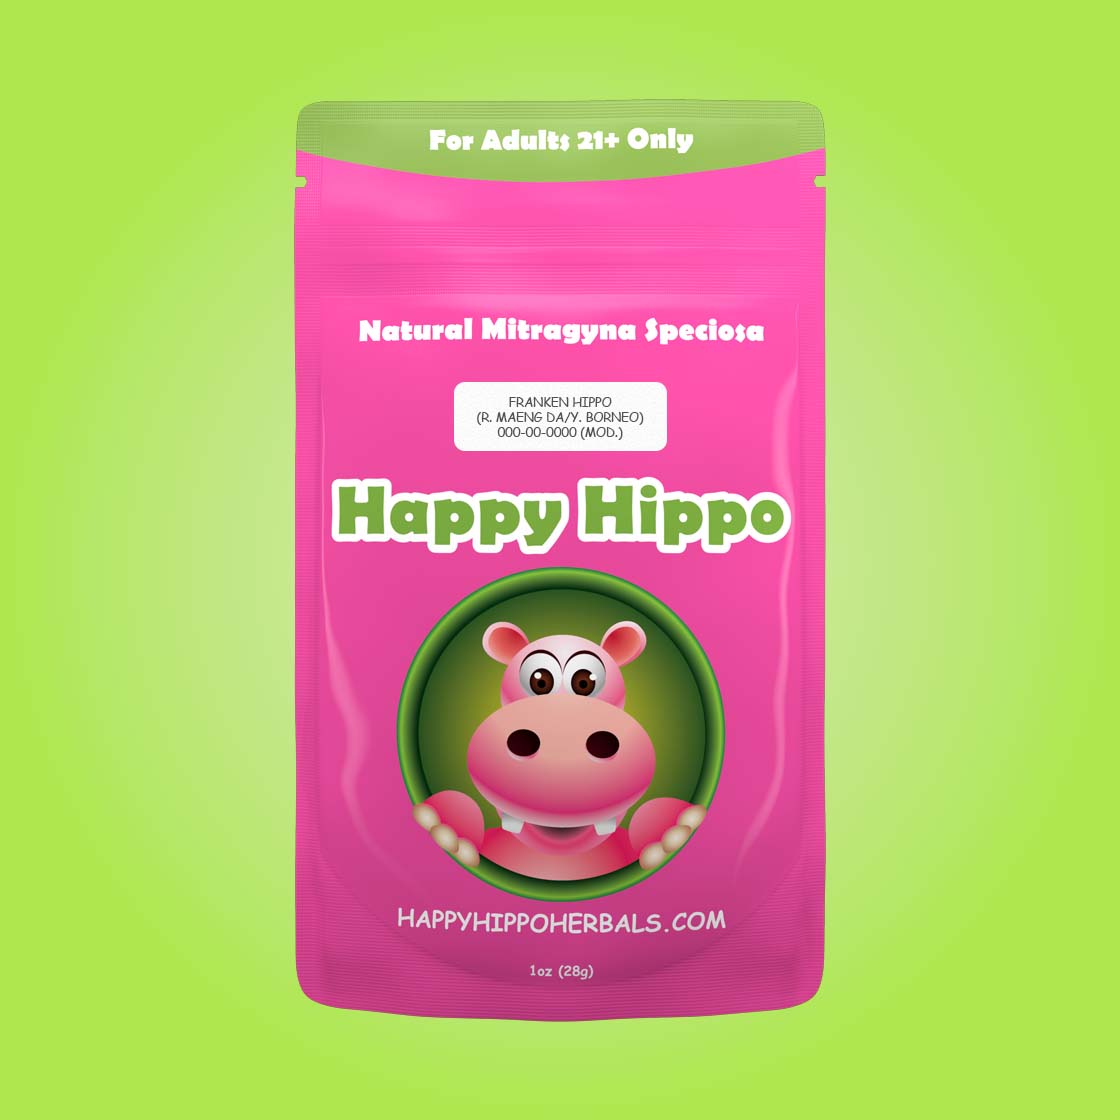 Product Image depicting a 1oz bag of Happy Hippo Blended Red Maeng Da and Yellow Vein Borneo Kratom Powder (Mitragyna Speciosa).